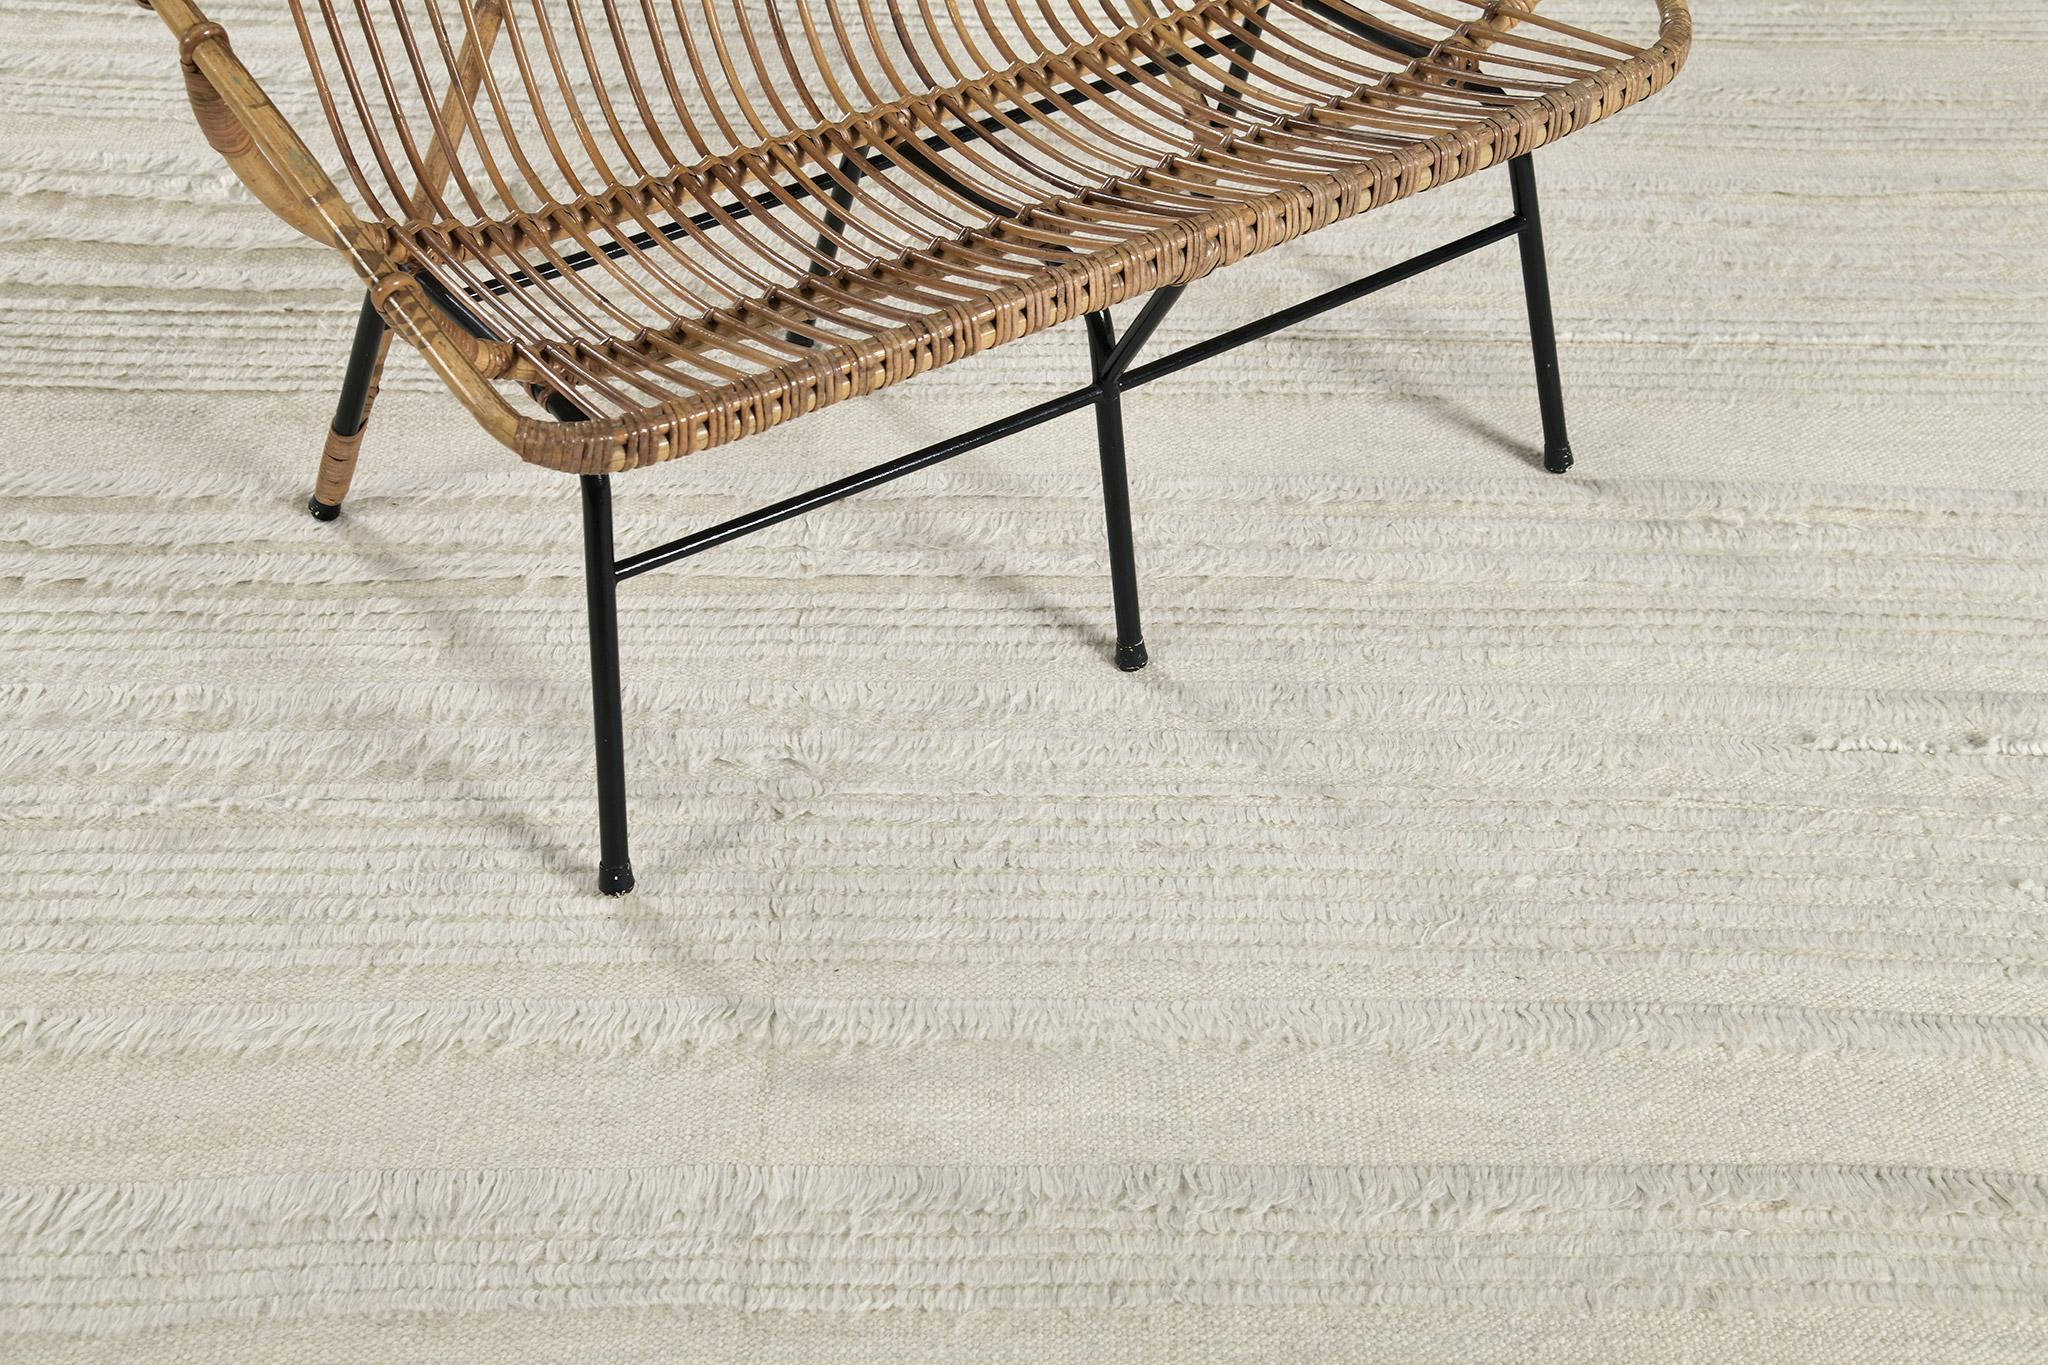 Kit Moresby II is luxurious wool that features embossed varying degrees of lines. Perfect decor for any home space because of its simplicity and modern-day interpretation. Mehraban's Atlas Collection is known for its intuitive motifs, saturated